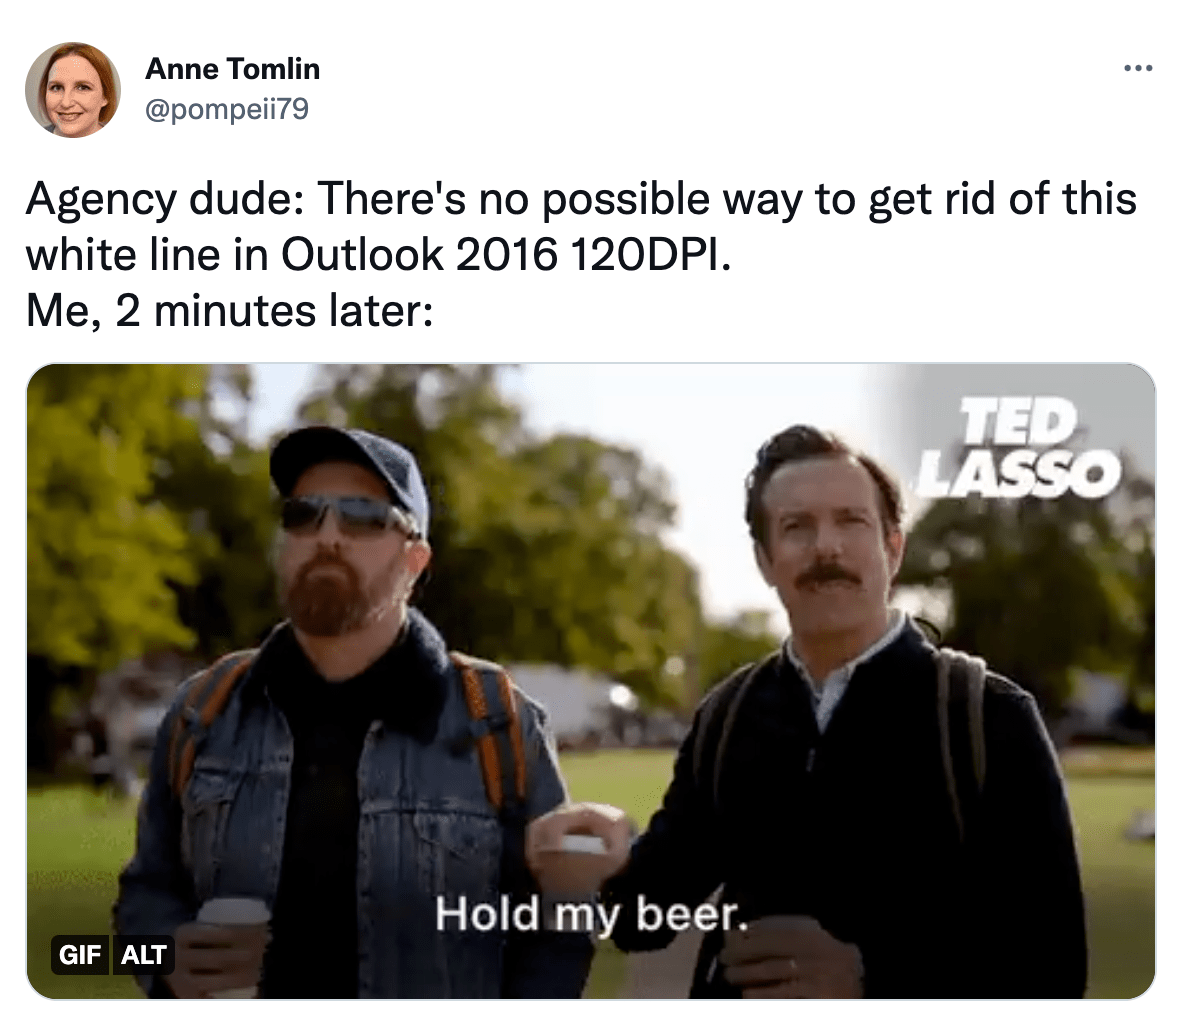 @pompeii79 on Twitter: Agency dude: There's no possible way to get rid of this white line in Outlook 2016DPI. Me, 2 minutes later: GIF from Ted Lasso, Ted passing his beer to Coach Beard saying Hold my beer.